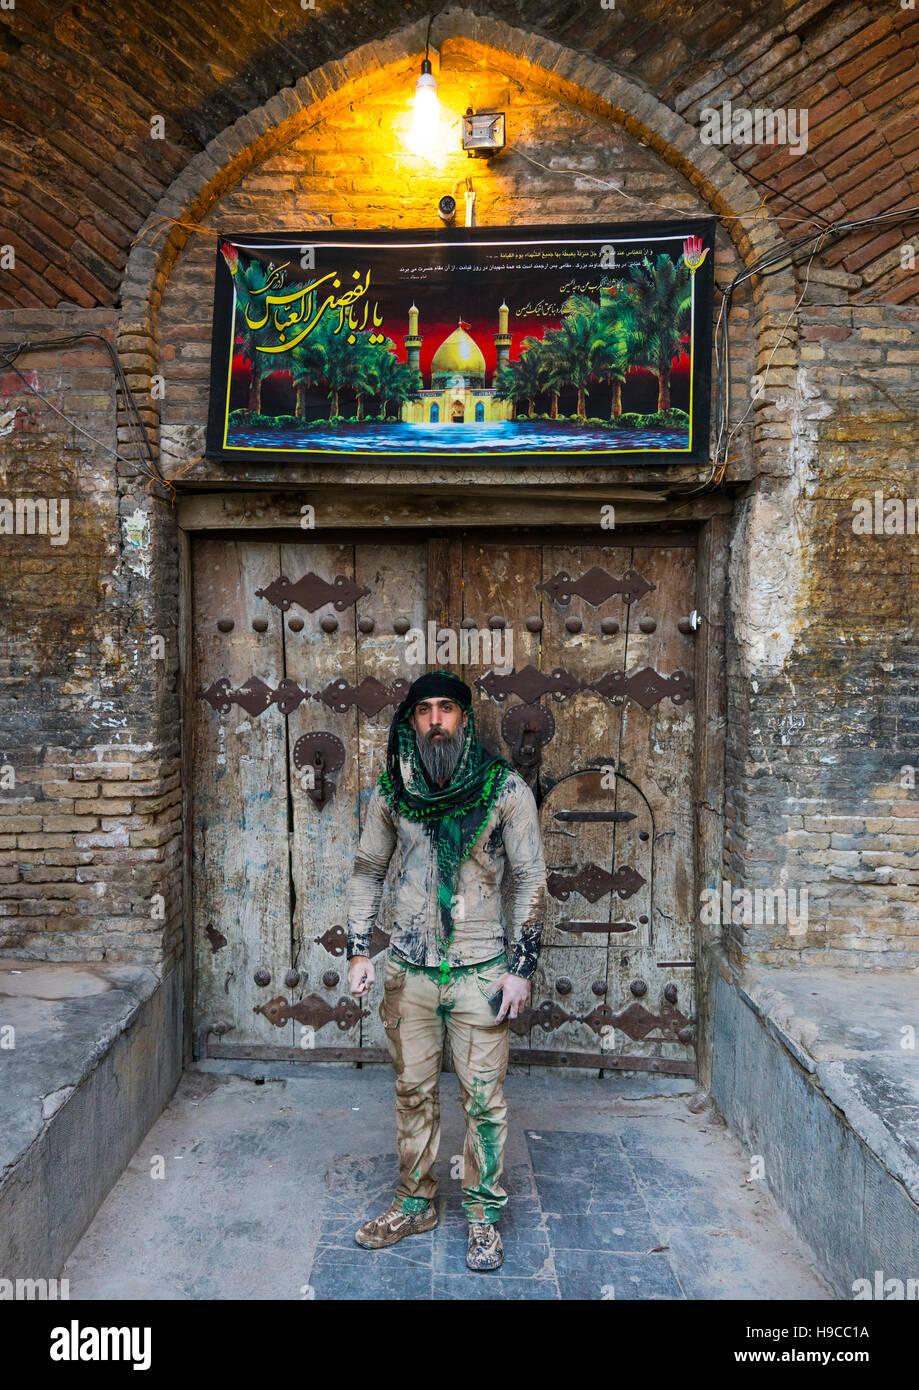 Iranian shiite muslim man standing in front of an old wooden door after rubbing mud on his clothes during the kharrah mali ritual to mark the ashura c Stock Photo